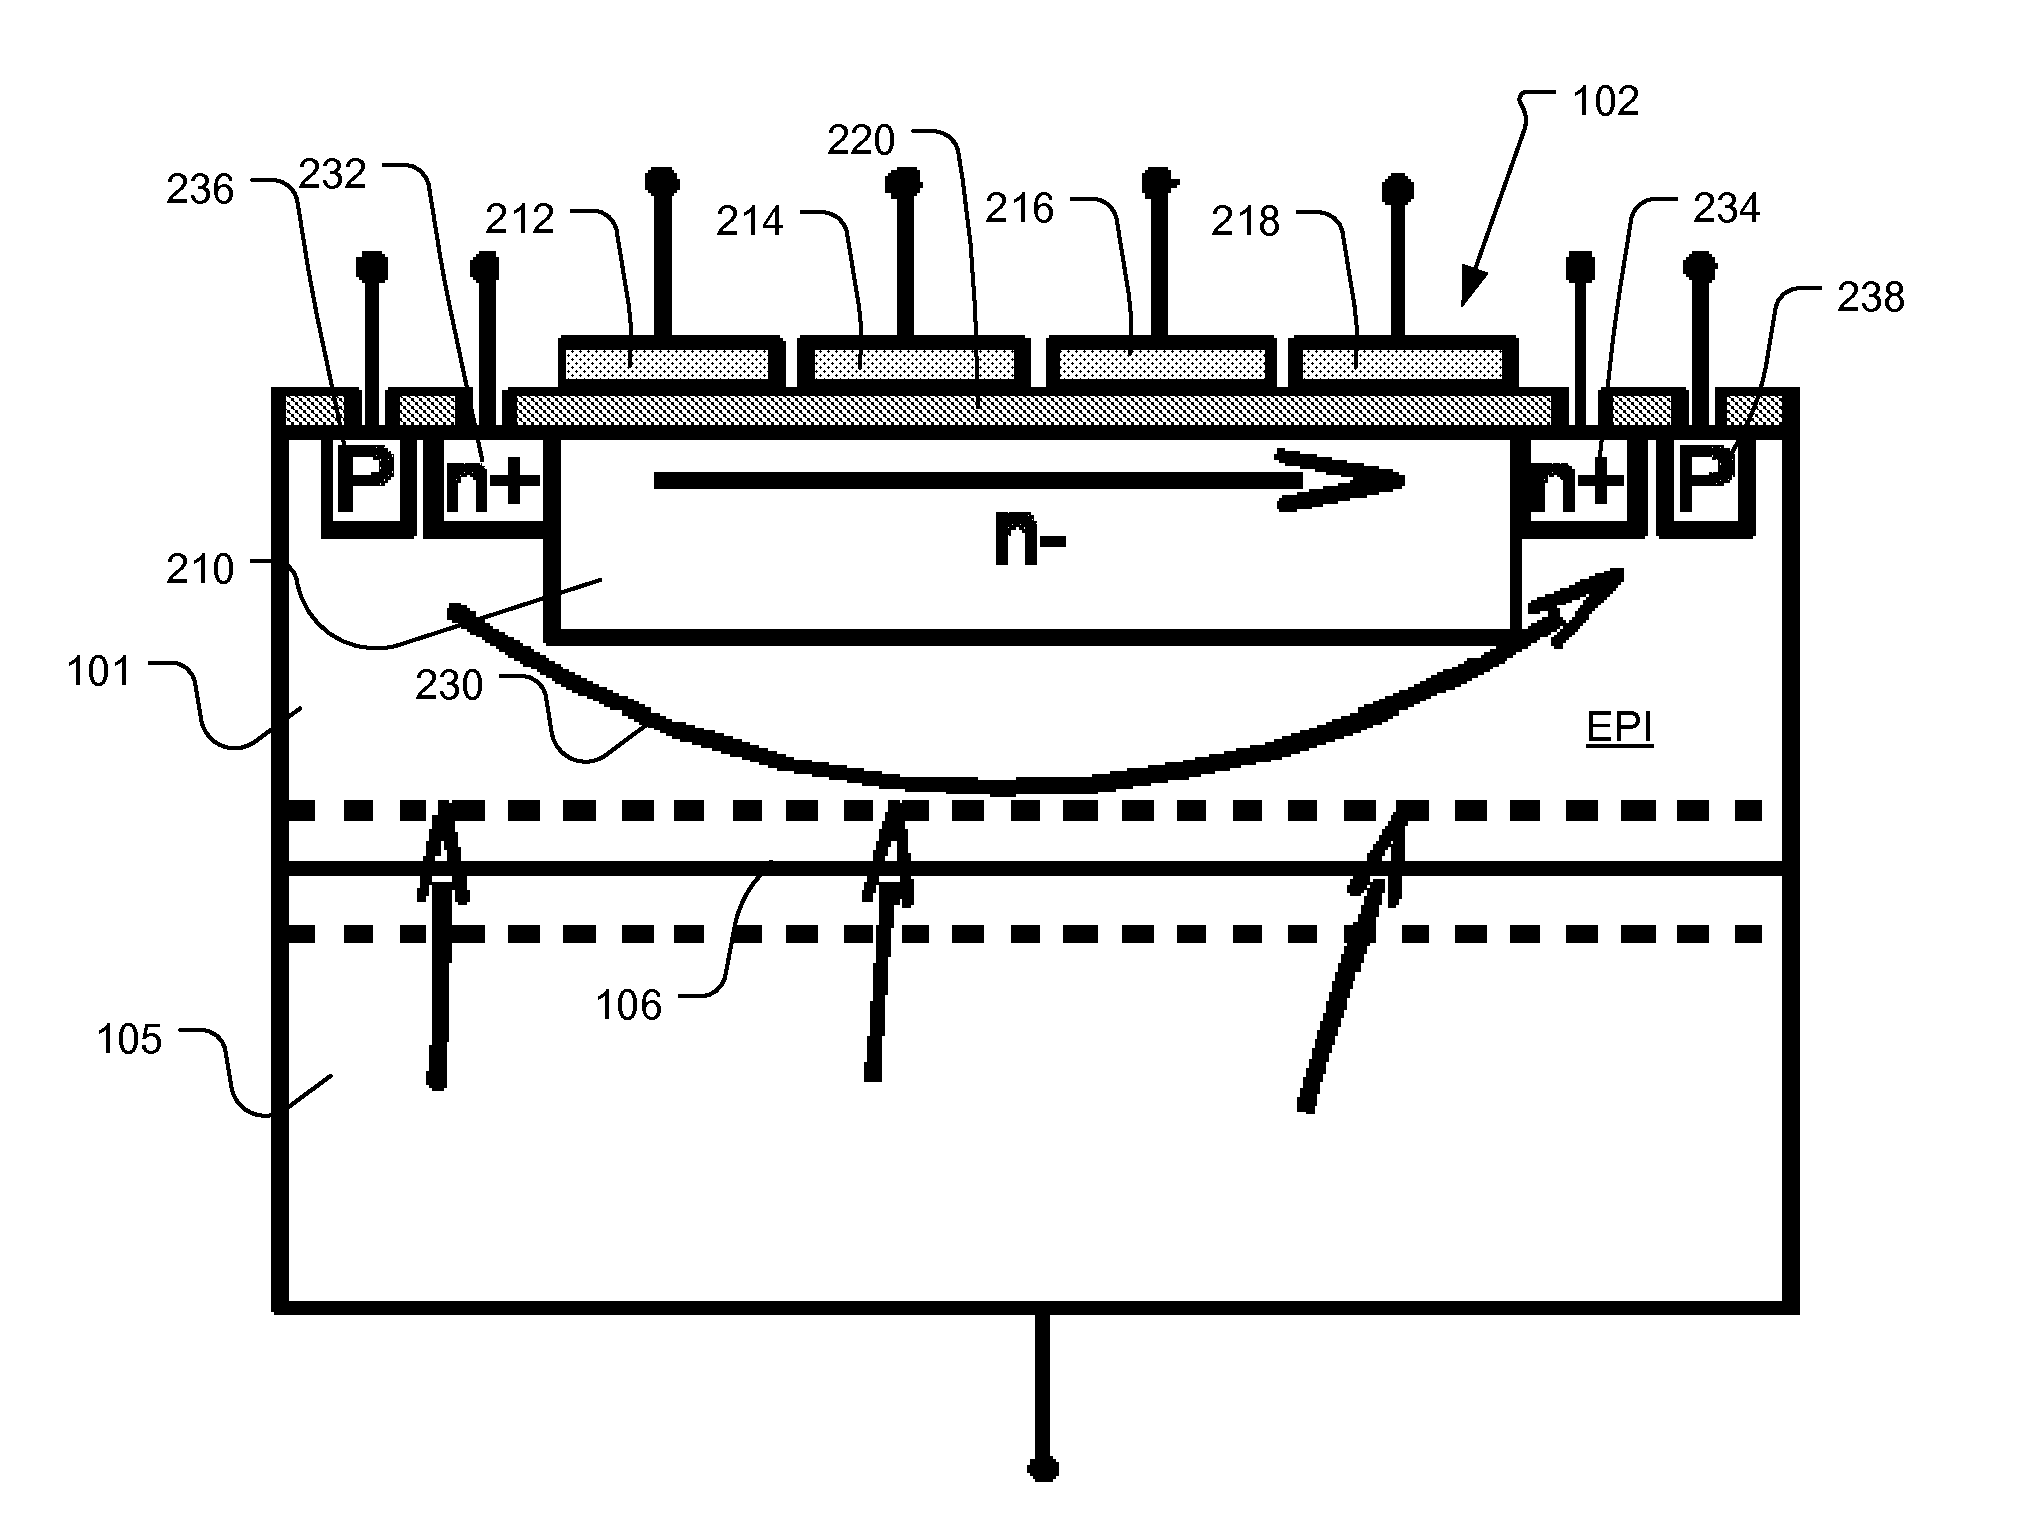 Demodulation Pixel Incorporating Majority Carrier Current, Buried Channel and High-Low Junction